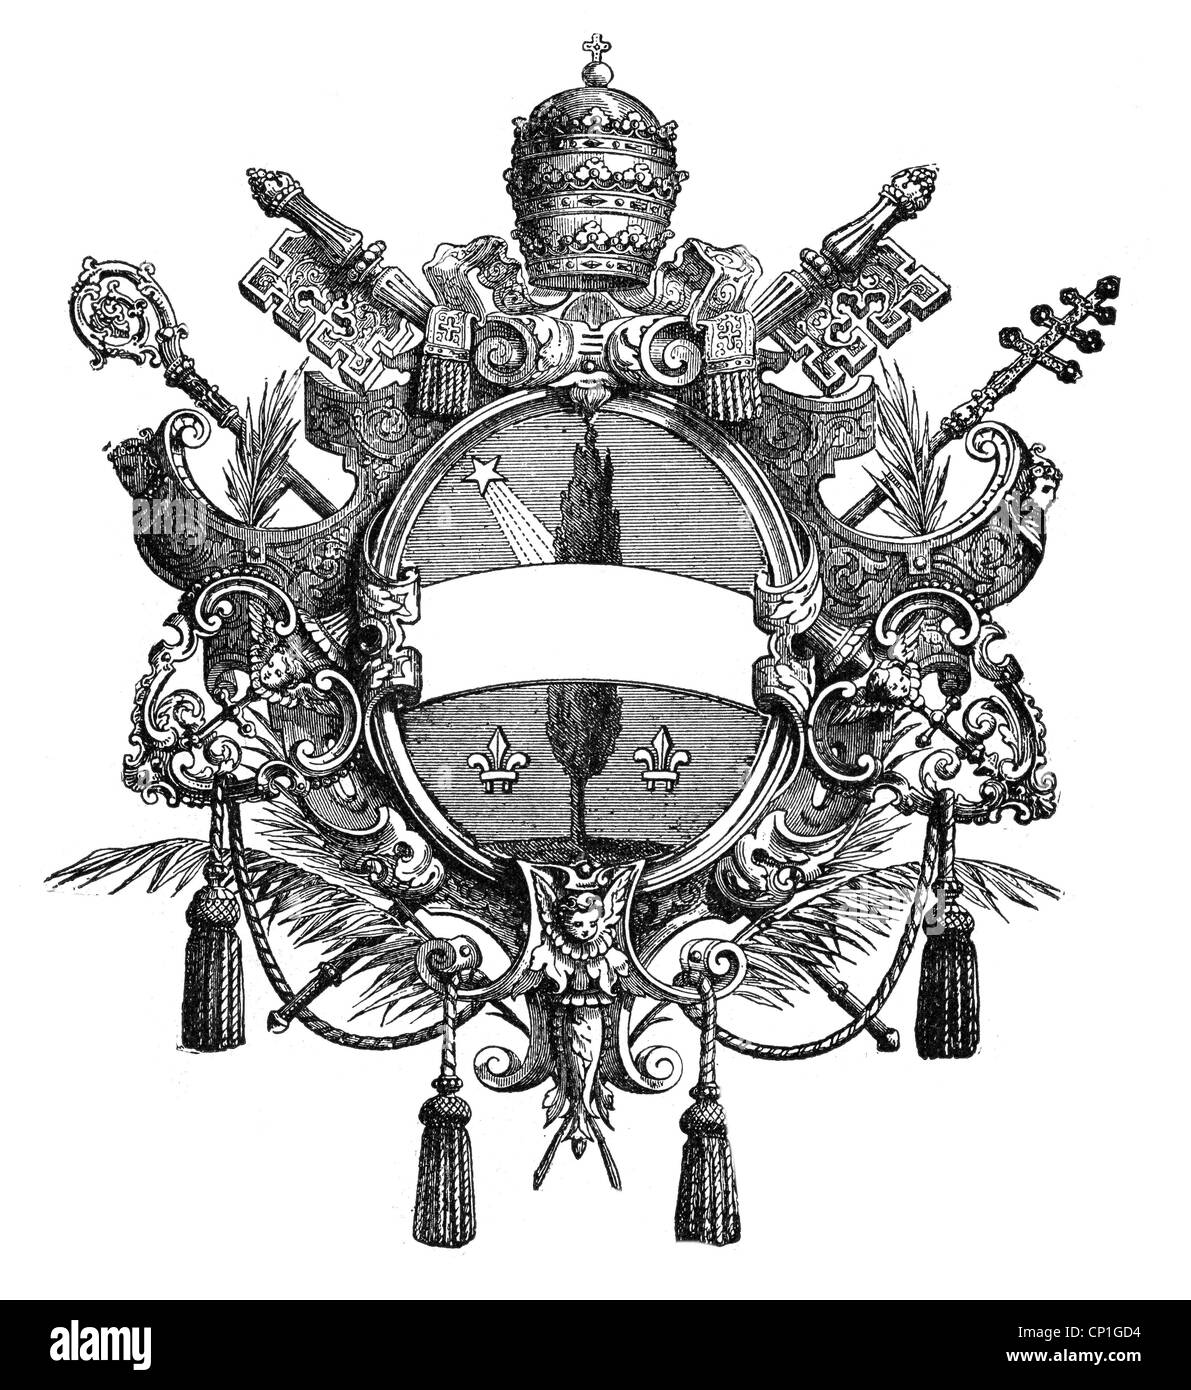 Leo XIII (Vincenzo Gioacchino count Pecci), 2.3.1810 - 20.6.1903, Pope 20.2.1878 - 20.6.1903, his coat of arms, wood engraving, 19th century, , Stock Photo